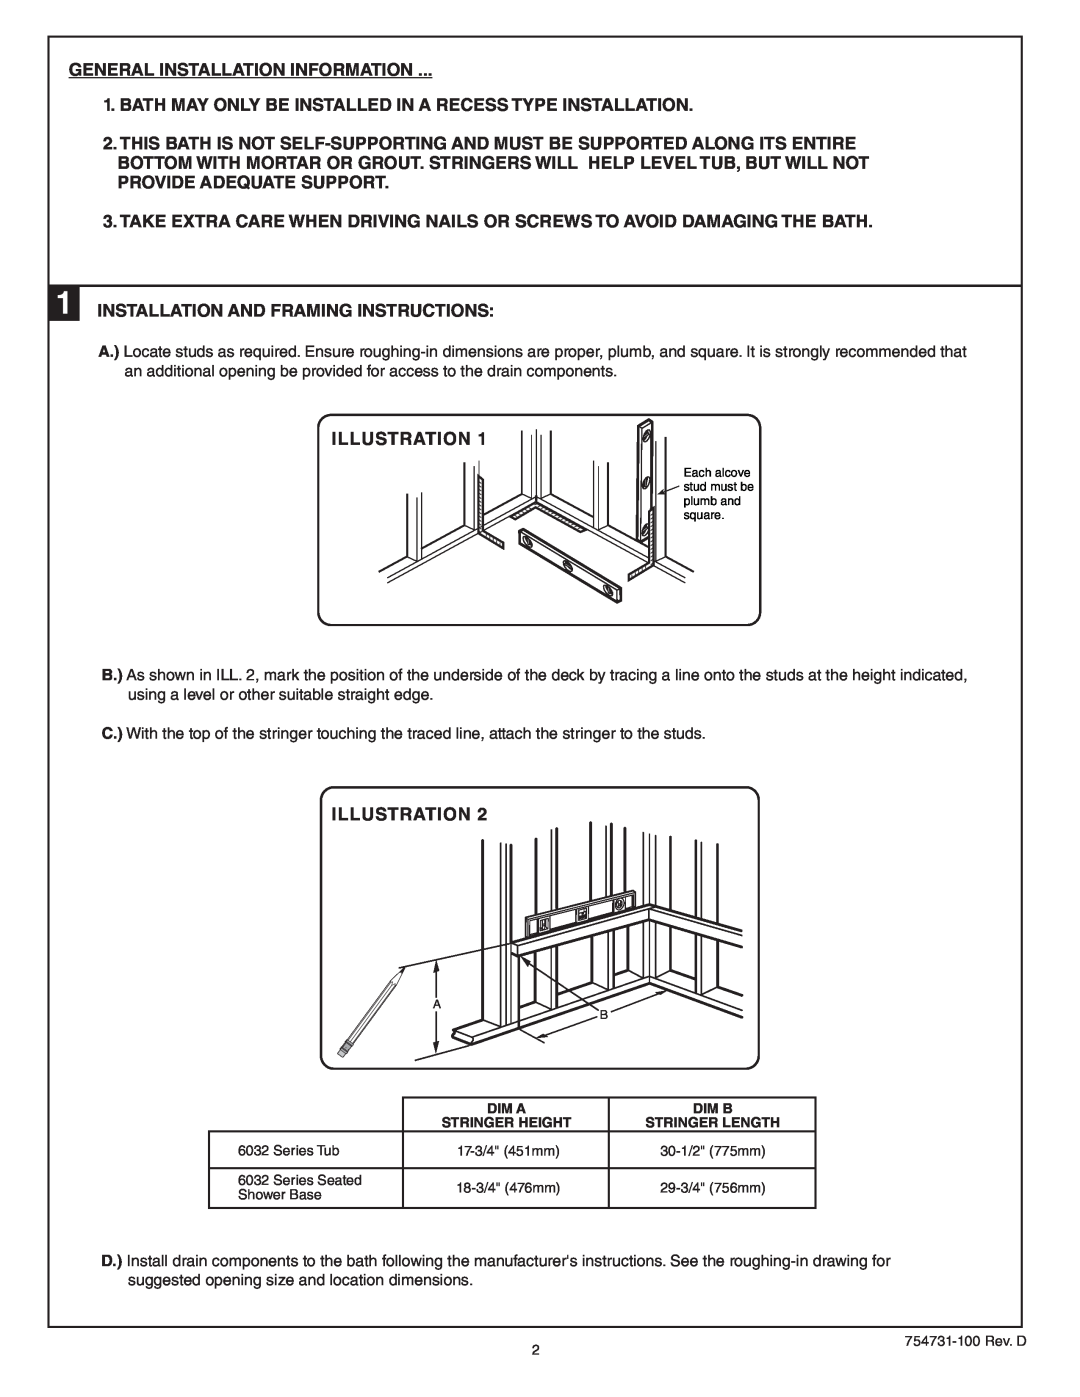 American Standard 6032 Series Seated Shower Base, Tub, Seated Shower Base Illustration, General Installation Information 